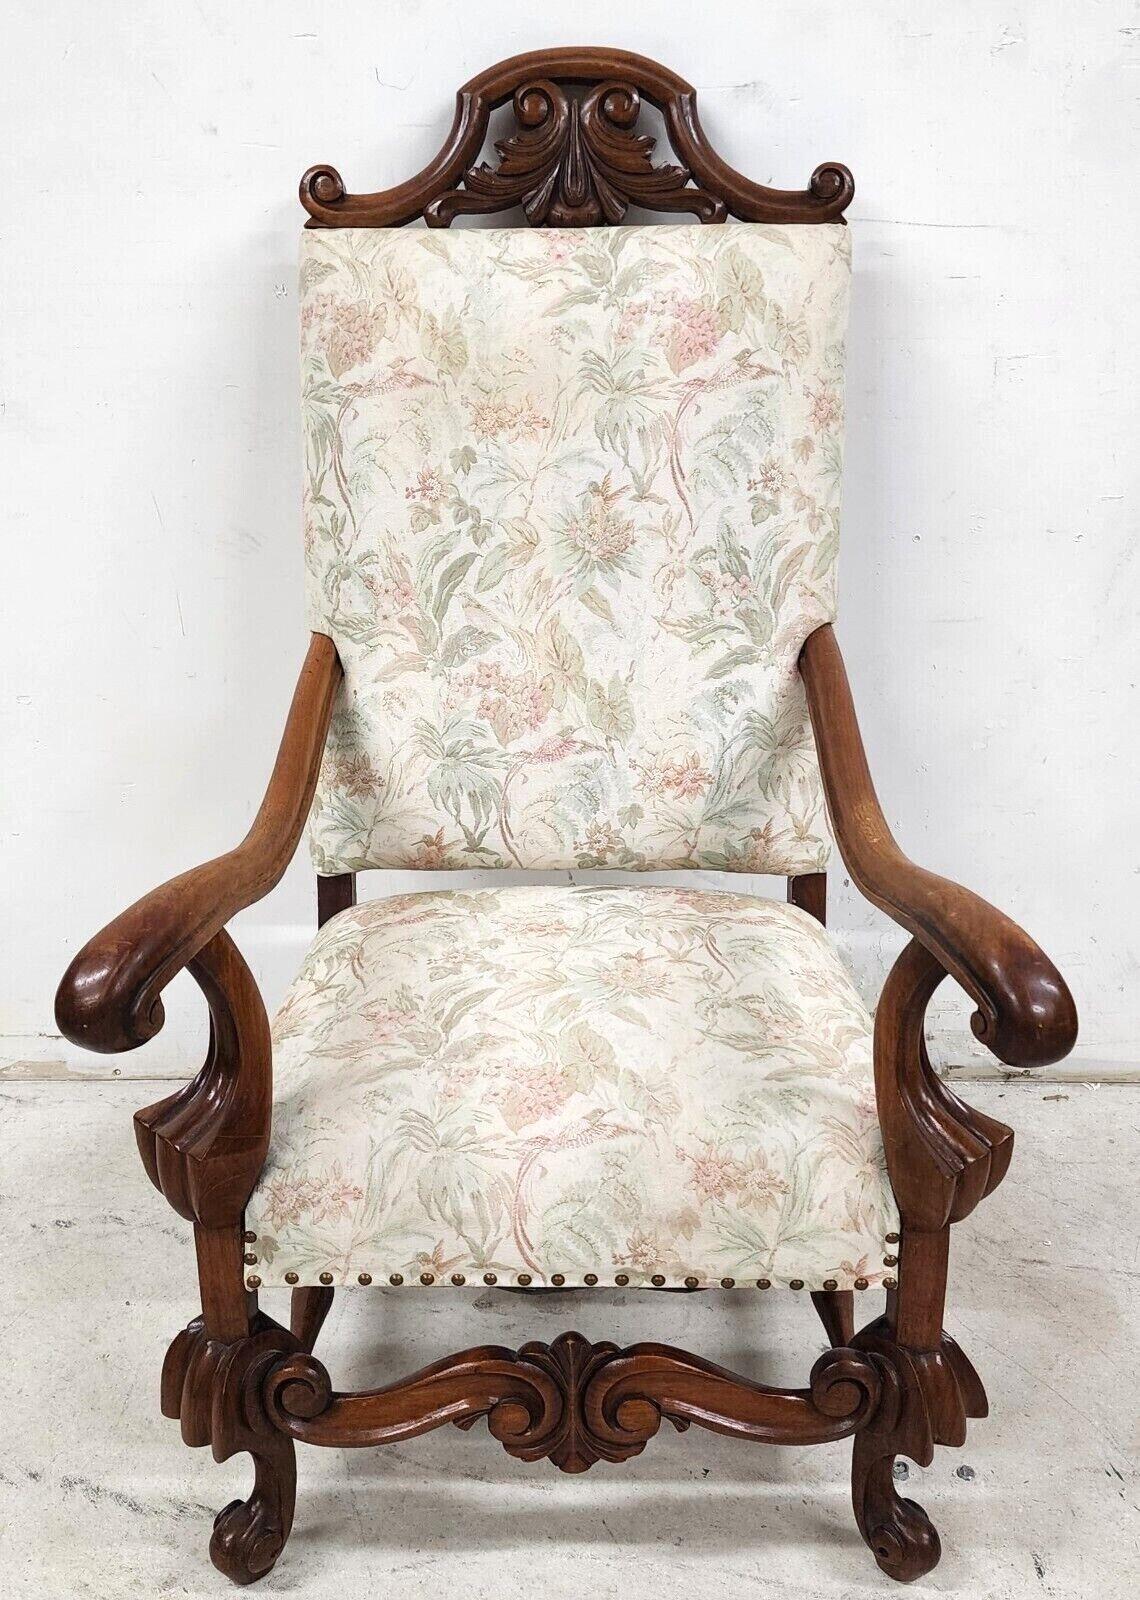 For FULL item description be sure to click on CONTINUE READING at the bottom of this listing.

Offering one of our recent Palm Beach estate fine furniture acquisitions of a
1800s French Louis XIII Walnut Throne Armchair
With wonderful carvings and